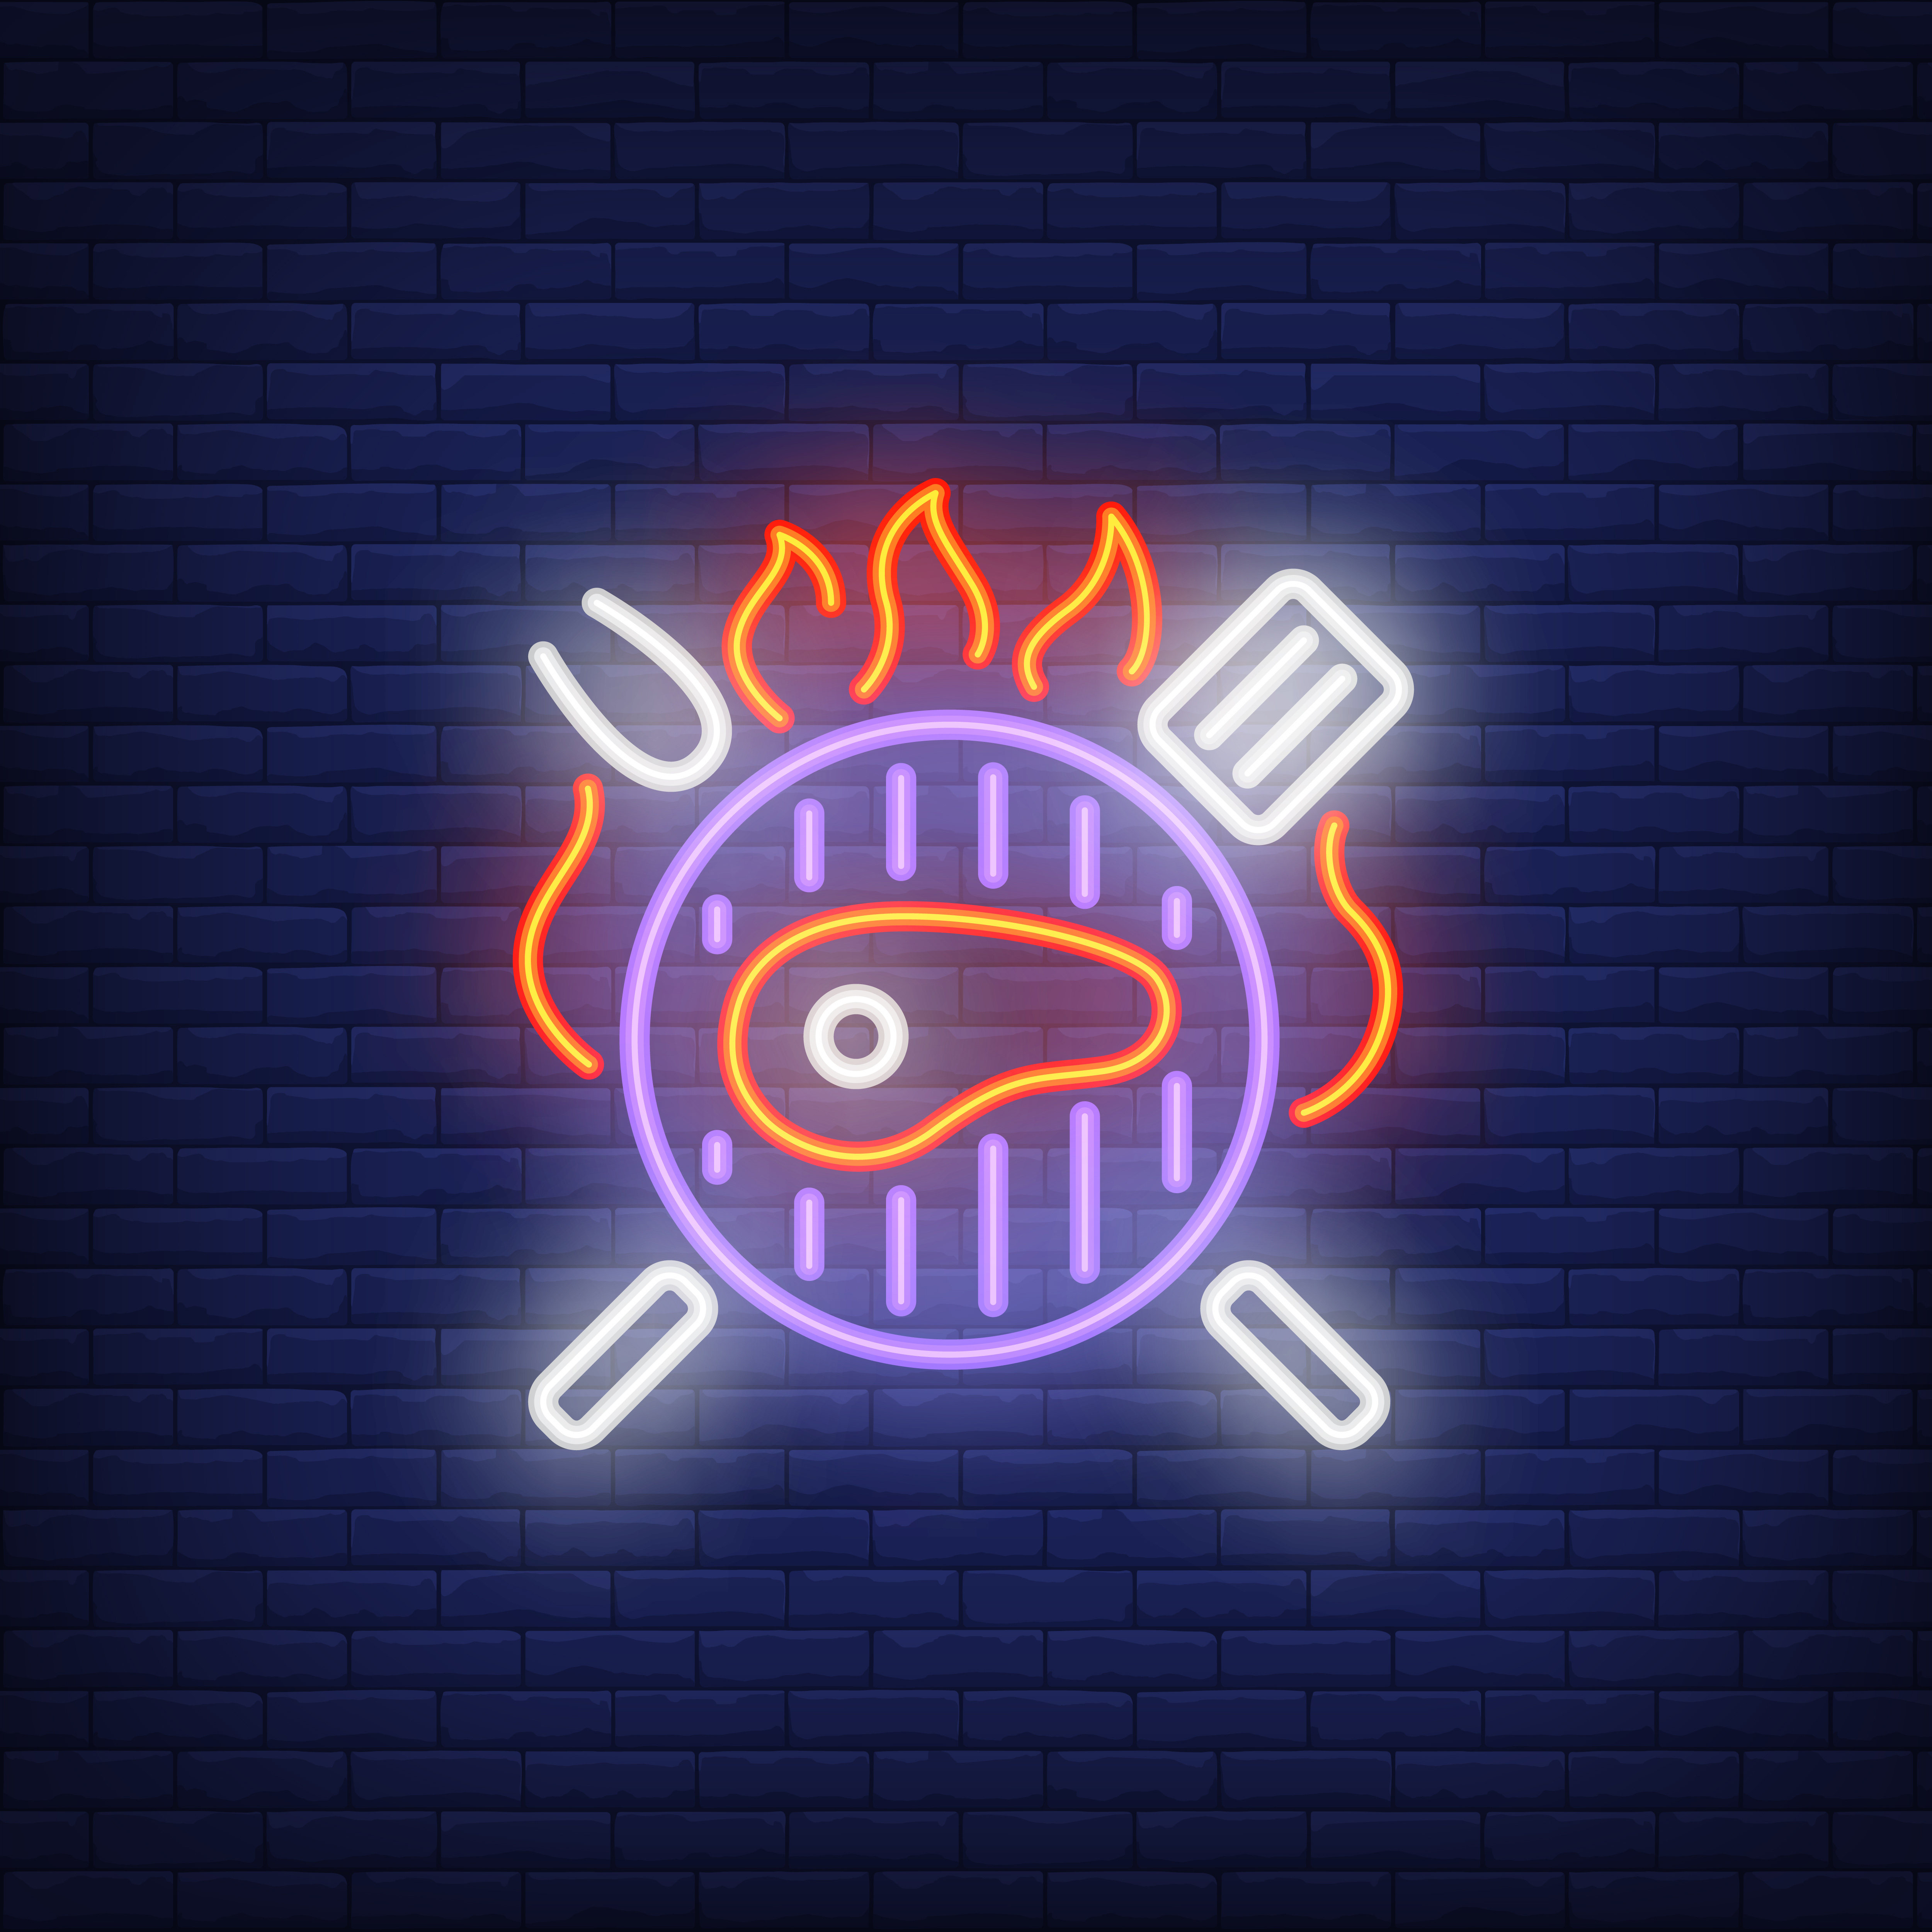 Beef steak on barbeque grill neon sign